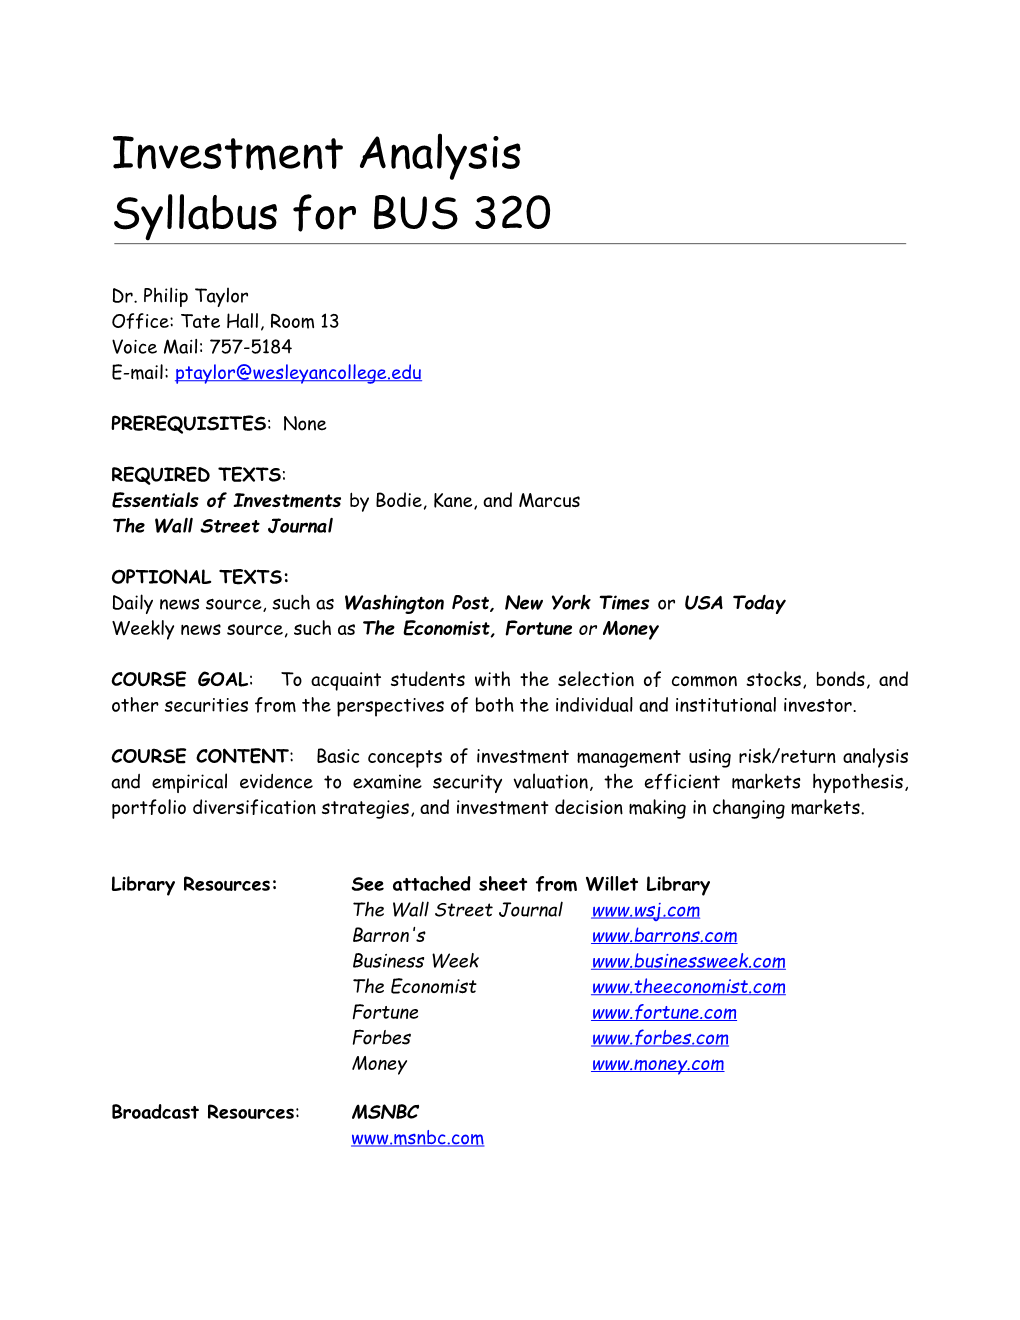 BUS 320 - Investments Analysis